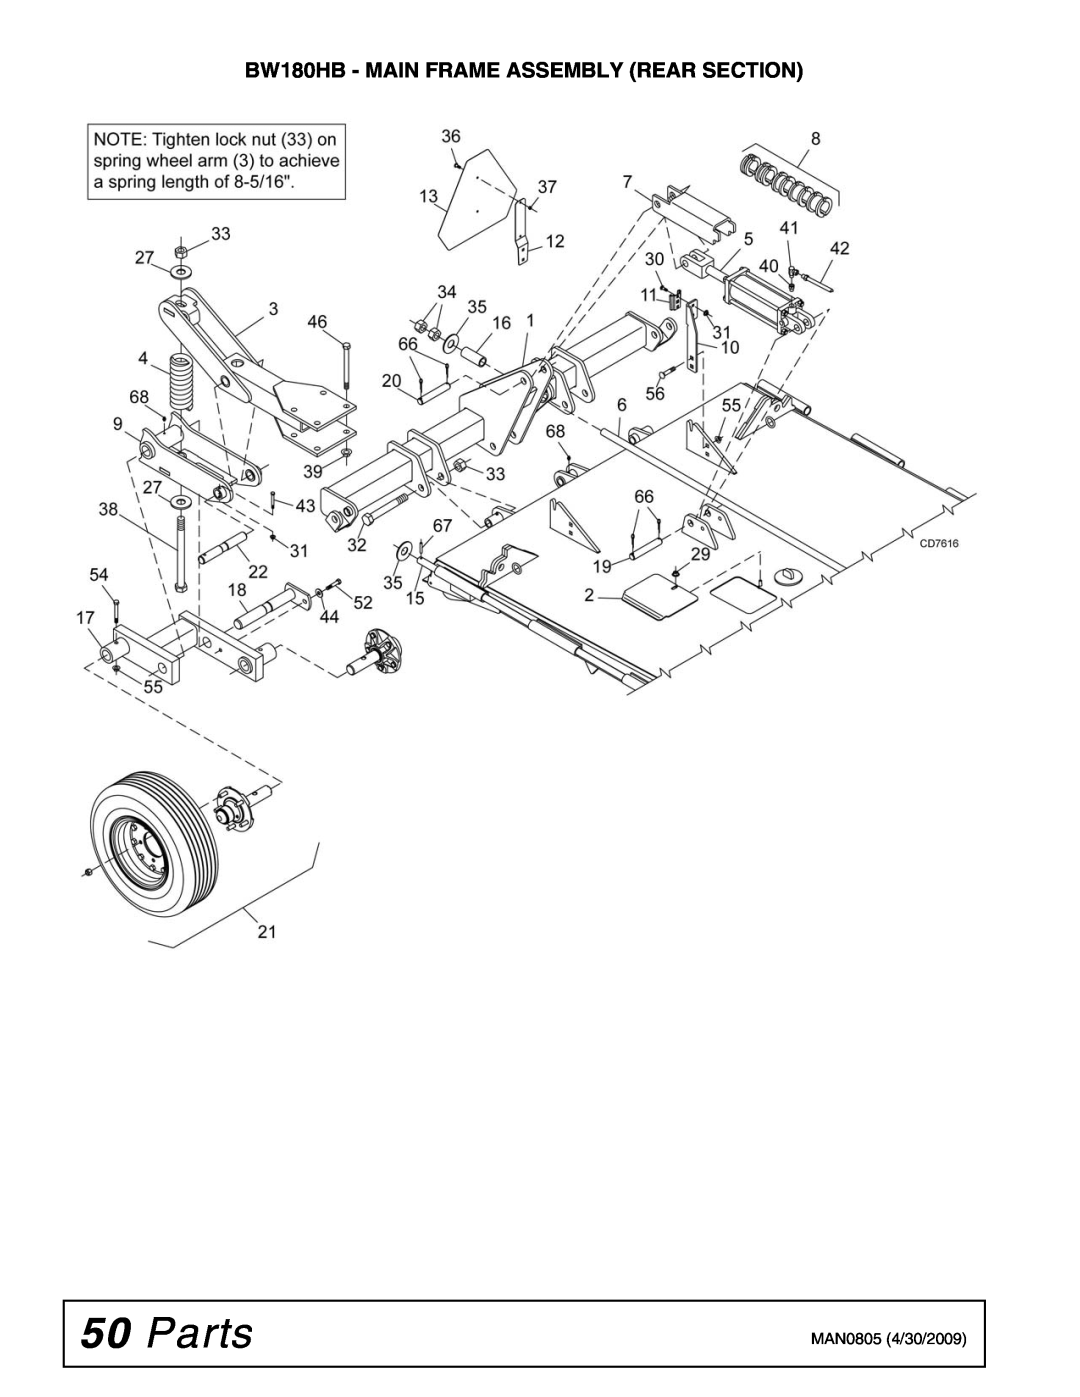 Woods Equipment BW180HDQ manual Parts, BW180HB - MAIN FRAME ASSEMBLY REAR SECTION 